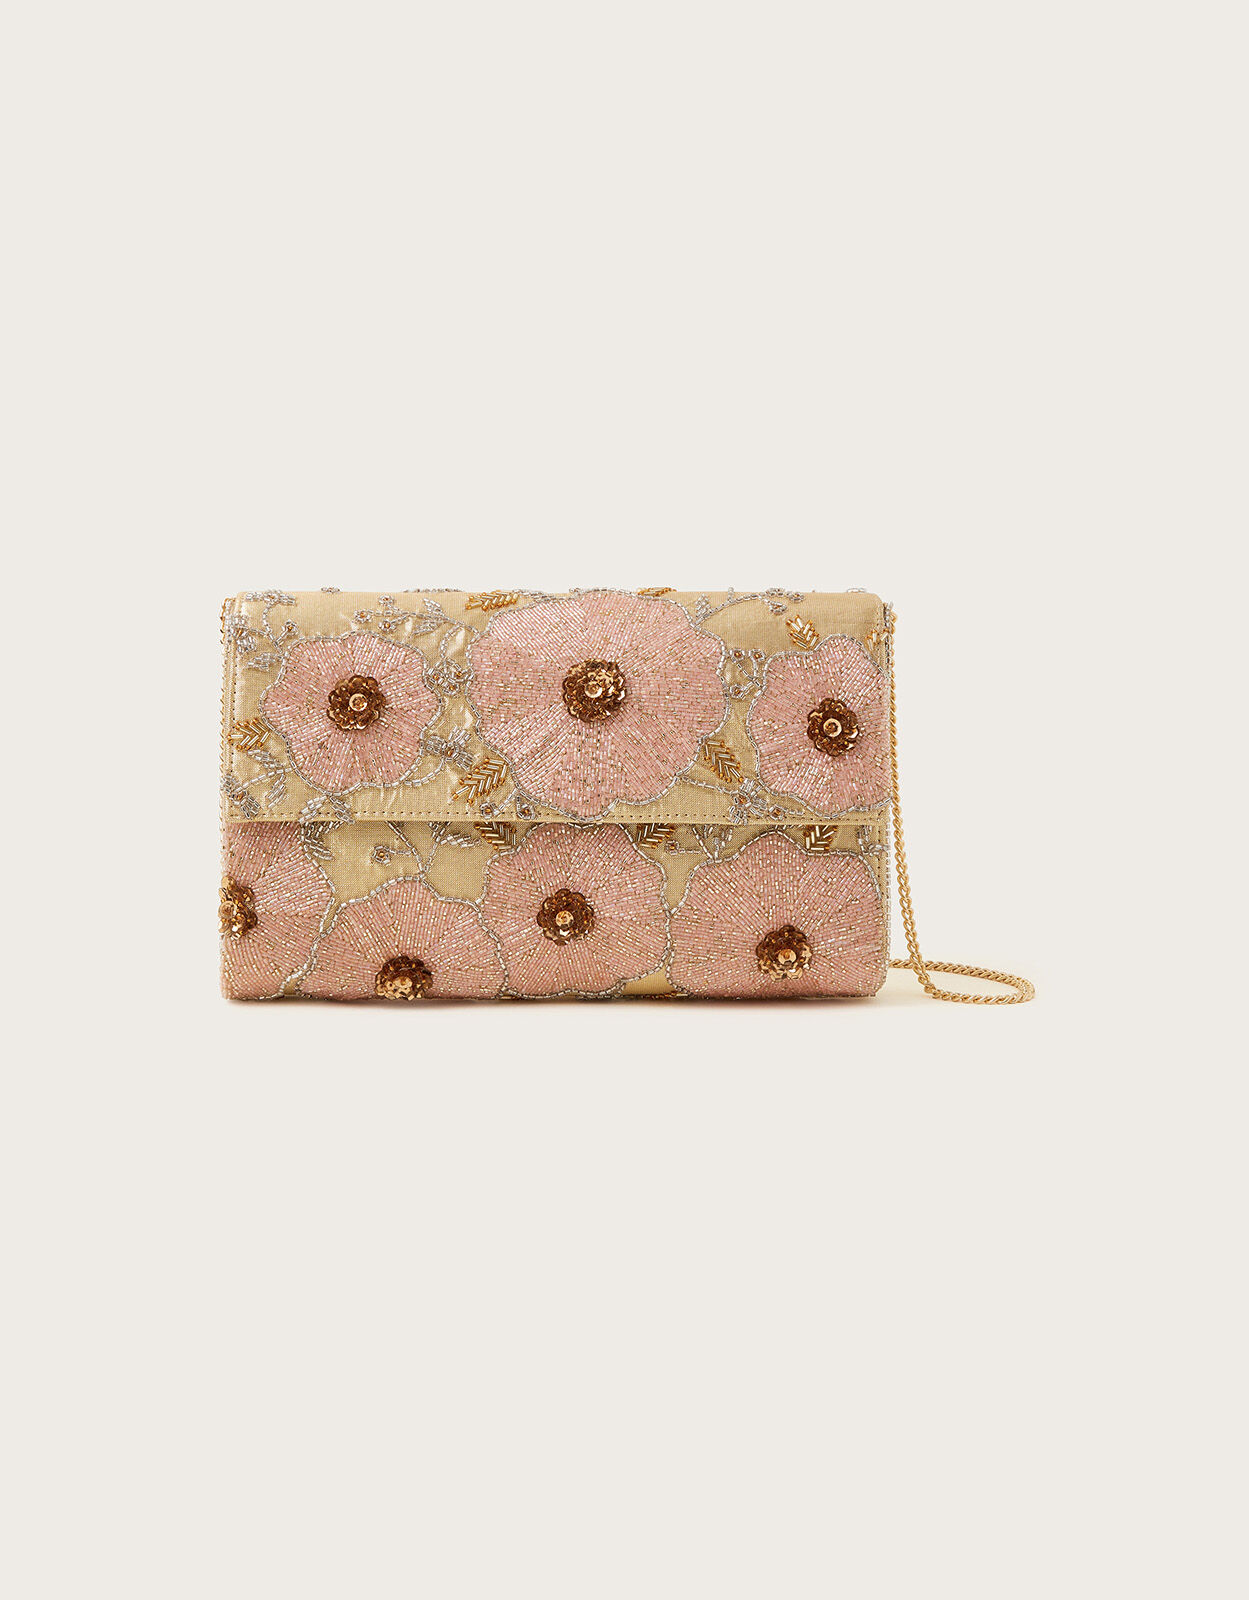 NEW MONSOON ACCESSORIZE Embellished Beaded Clutch Evening Bag RRP £38 |  Embellished clutch bags, Pink gem, Beaded clutch